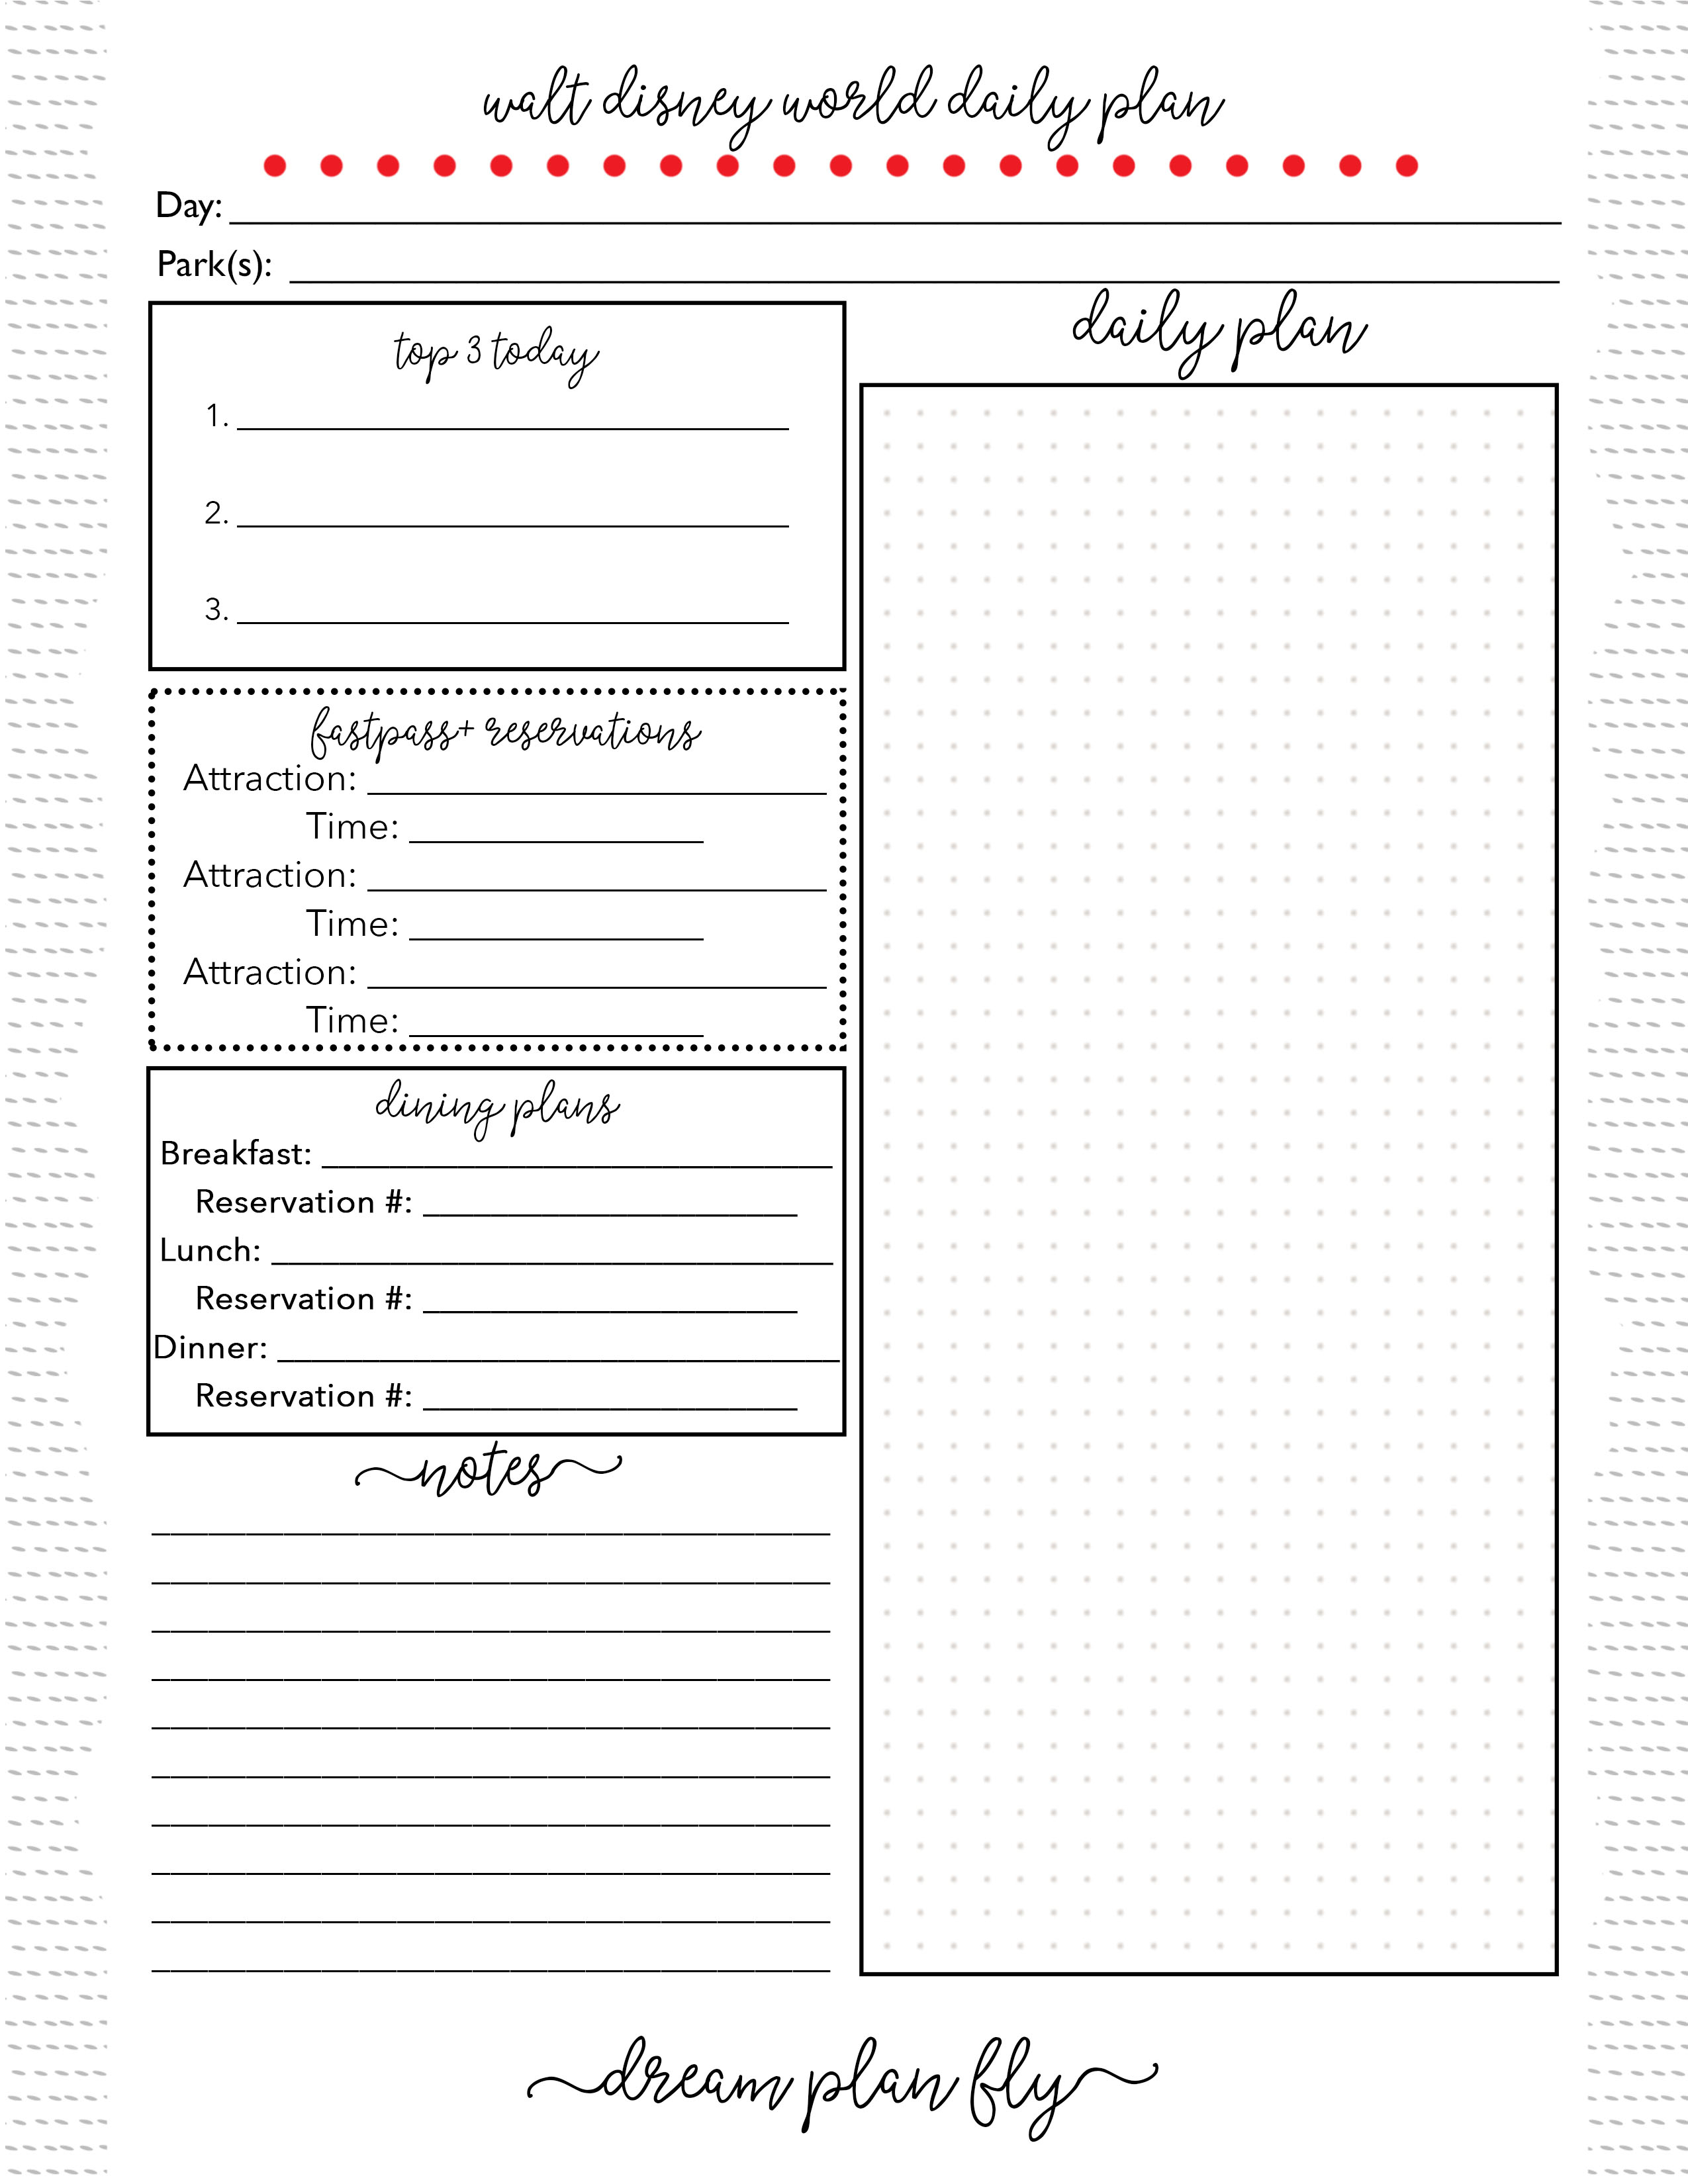 Free Printable Daily Planner For Walt Disney World  Dream intended for Disney Vacation Planner Template